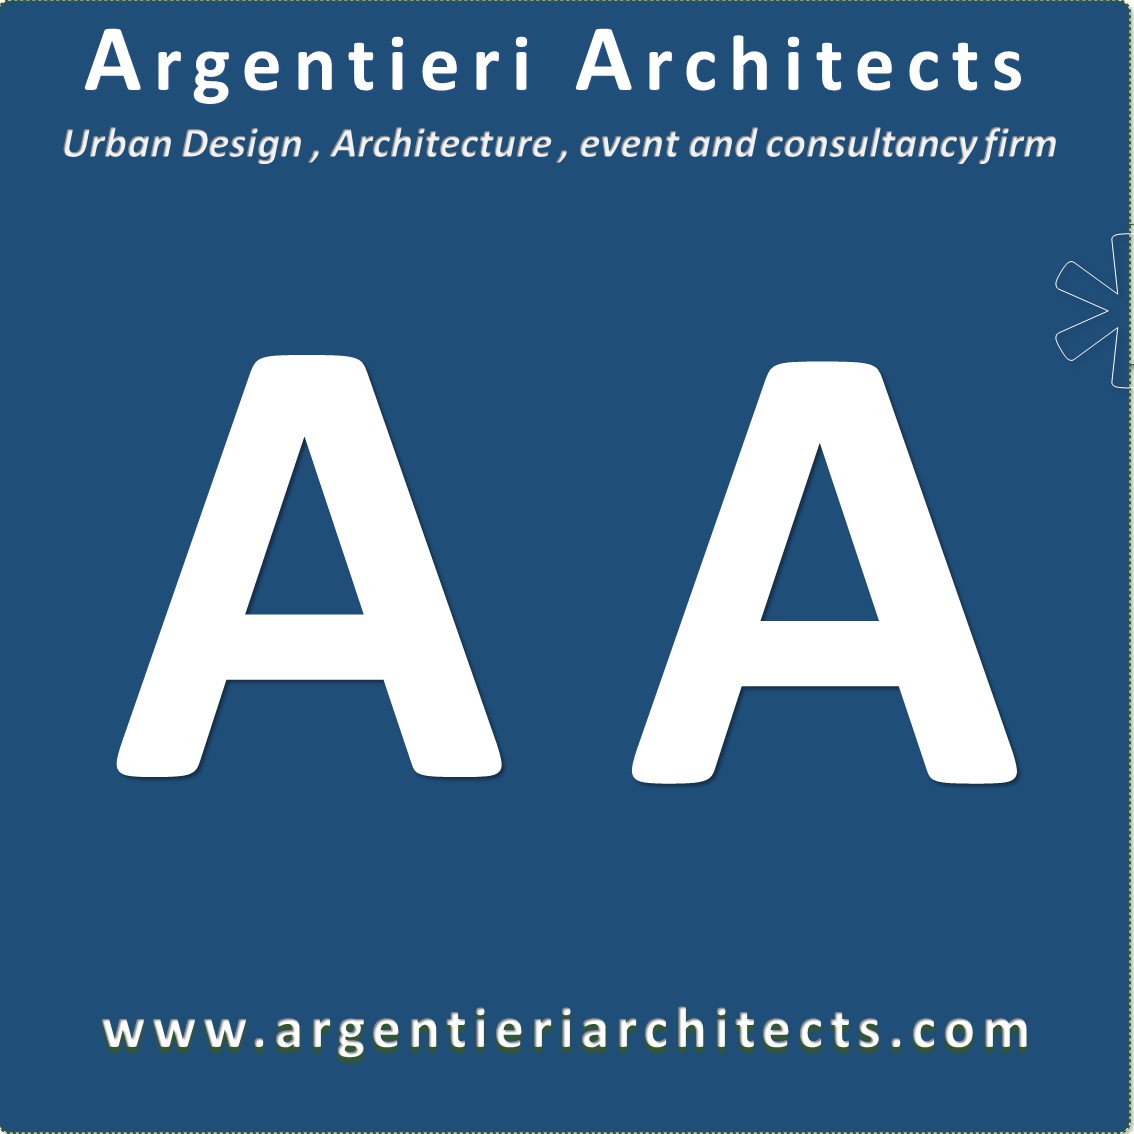 Projects- Argentieri Architects is an innovation and design firm. International expert on urban strategies & development, Smart Cities, architecture , retail and hospitality  